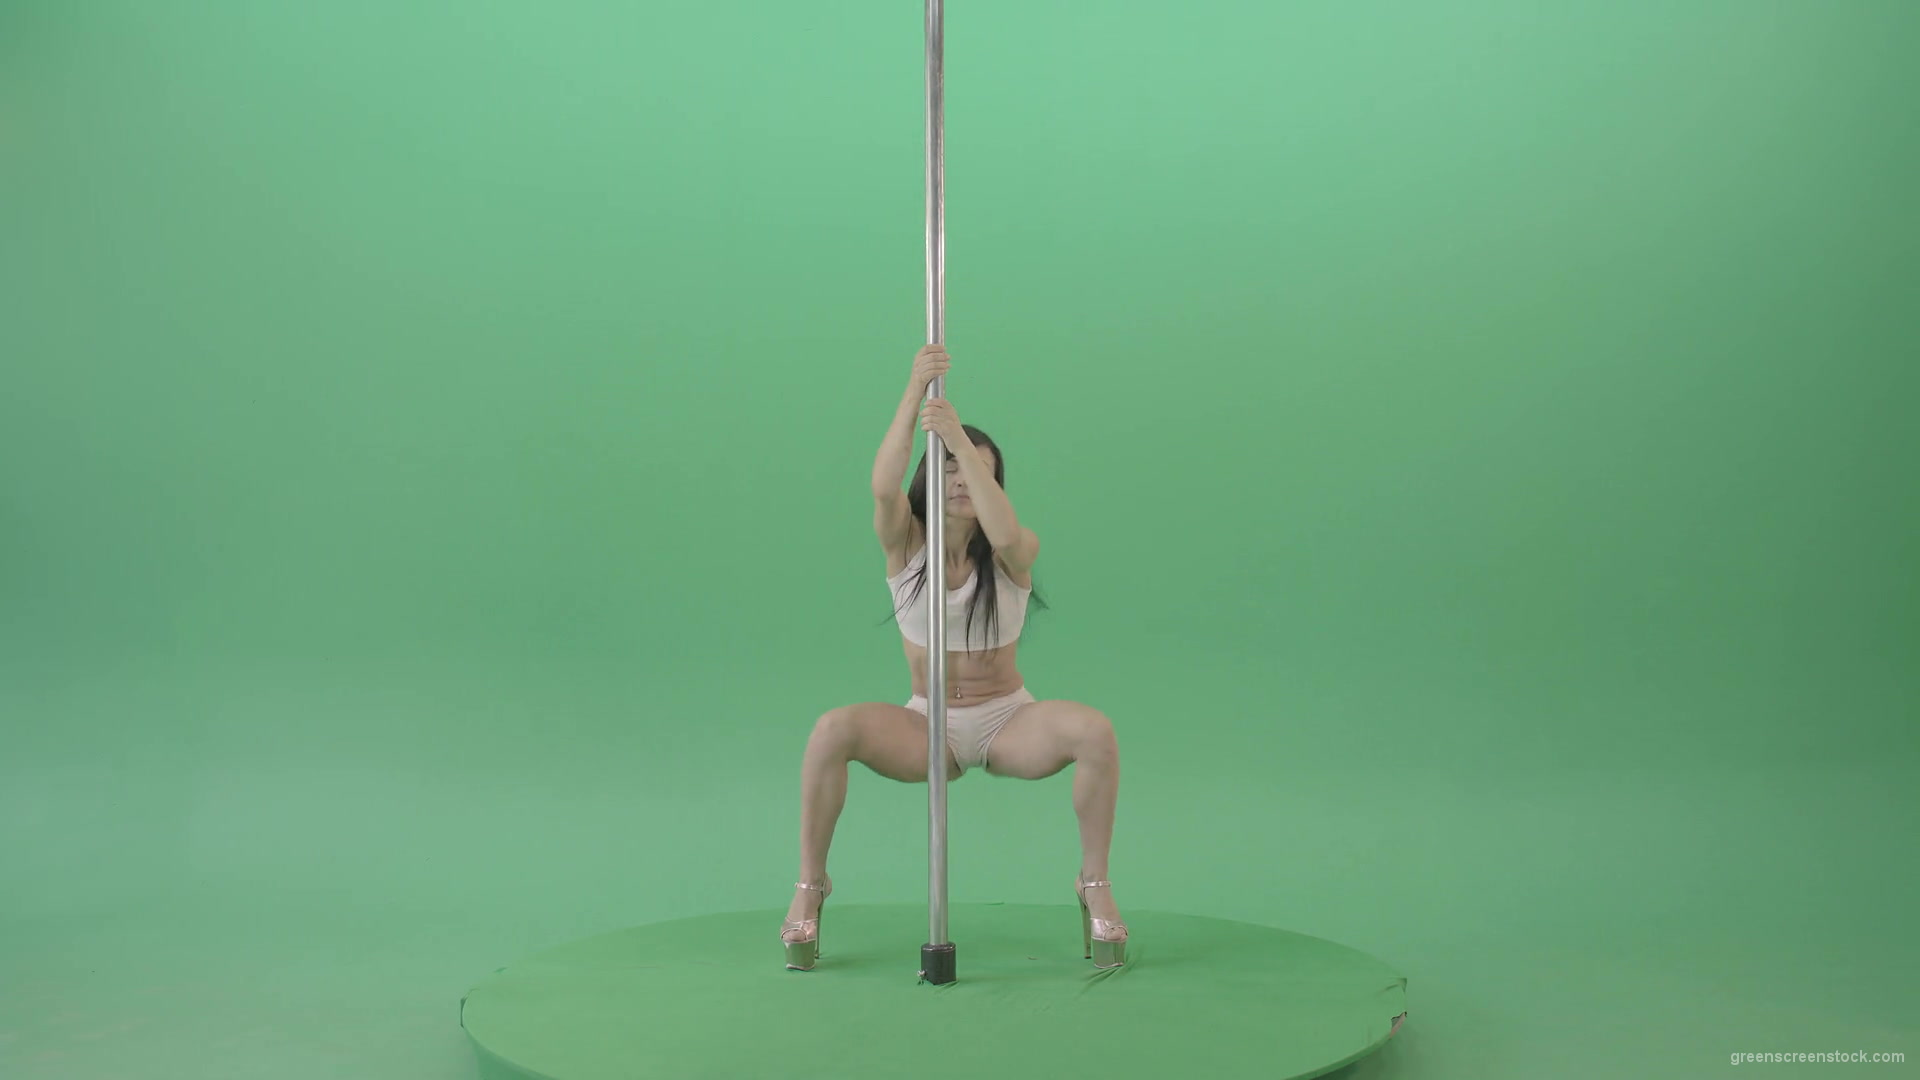 Pole-Dance-sport-girl-waving-sexy-body-isolated-on-green-screen-4K-Video-Footage-1920_006 Green Screen Stock